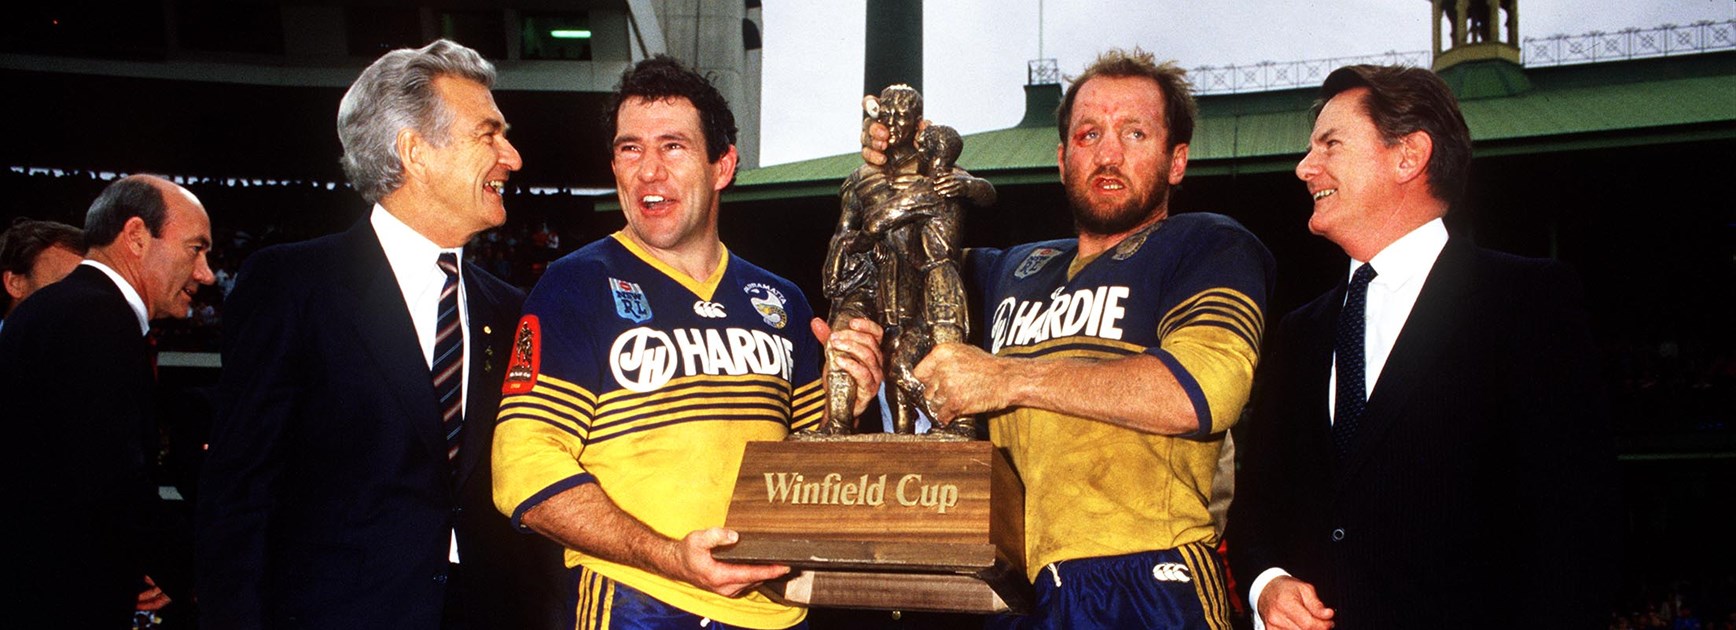 1986 grand final rewind: Cronin, Price bow out with another title